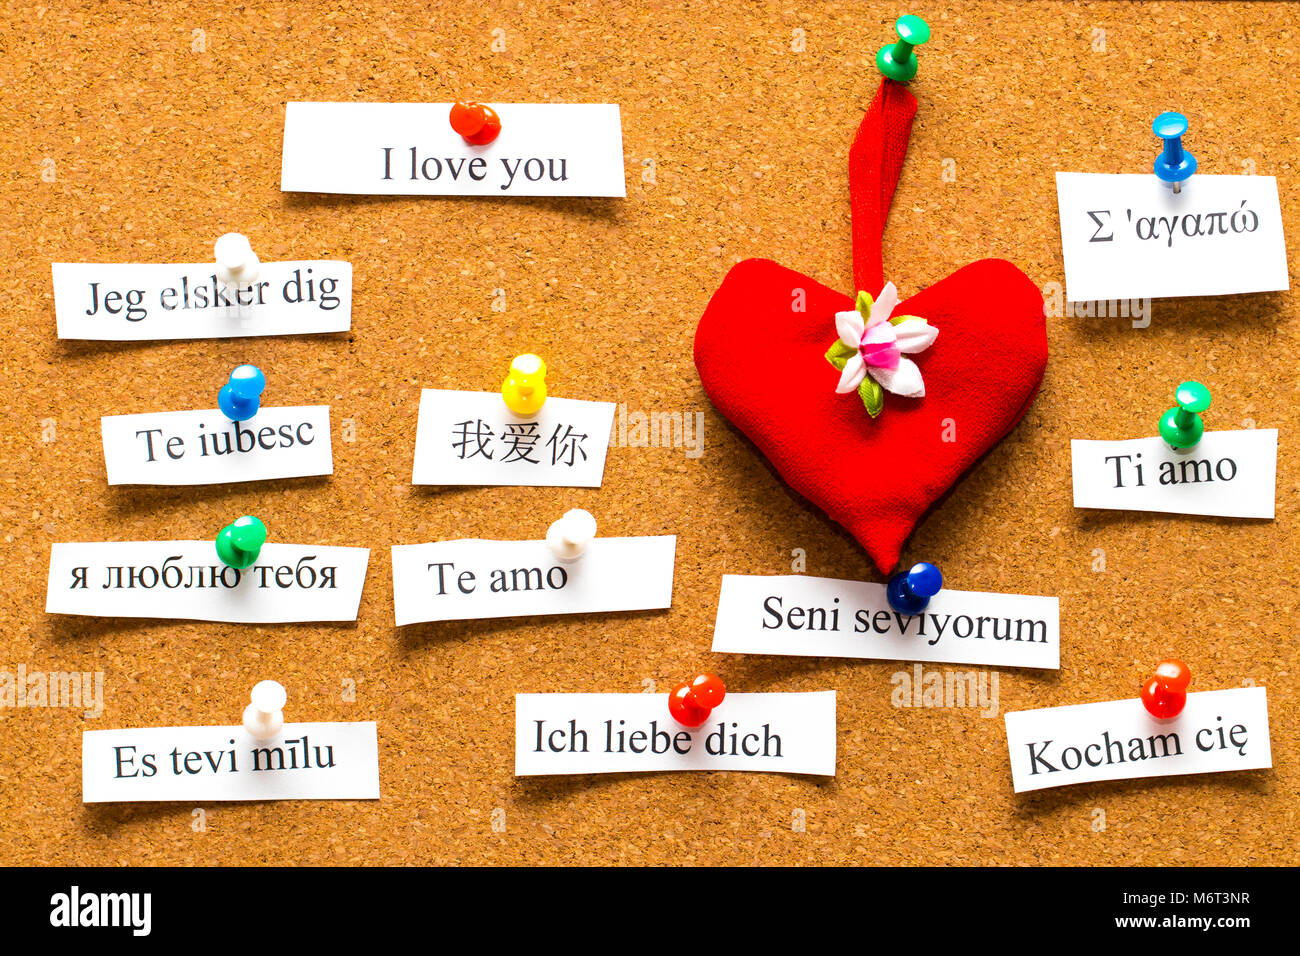 I Love You. Words printed on papers in different languages Stock Photo